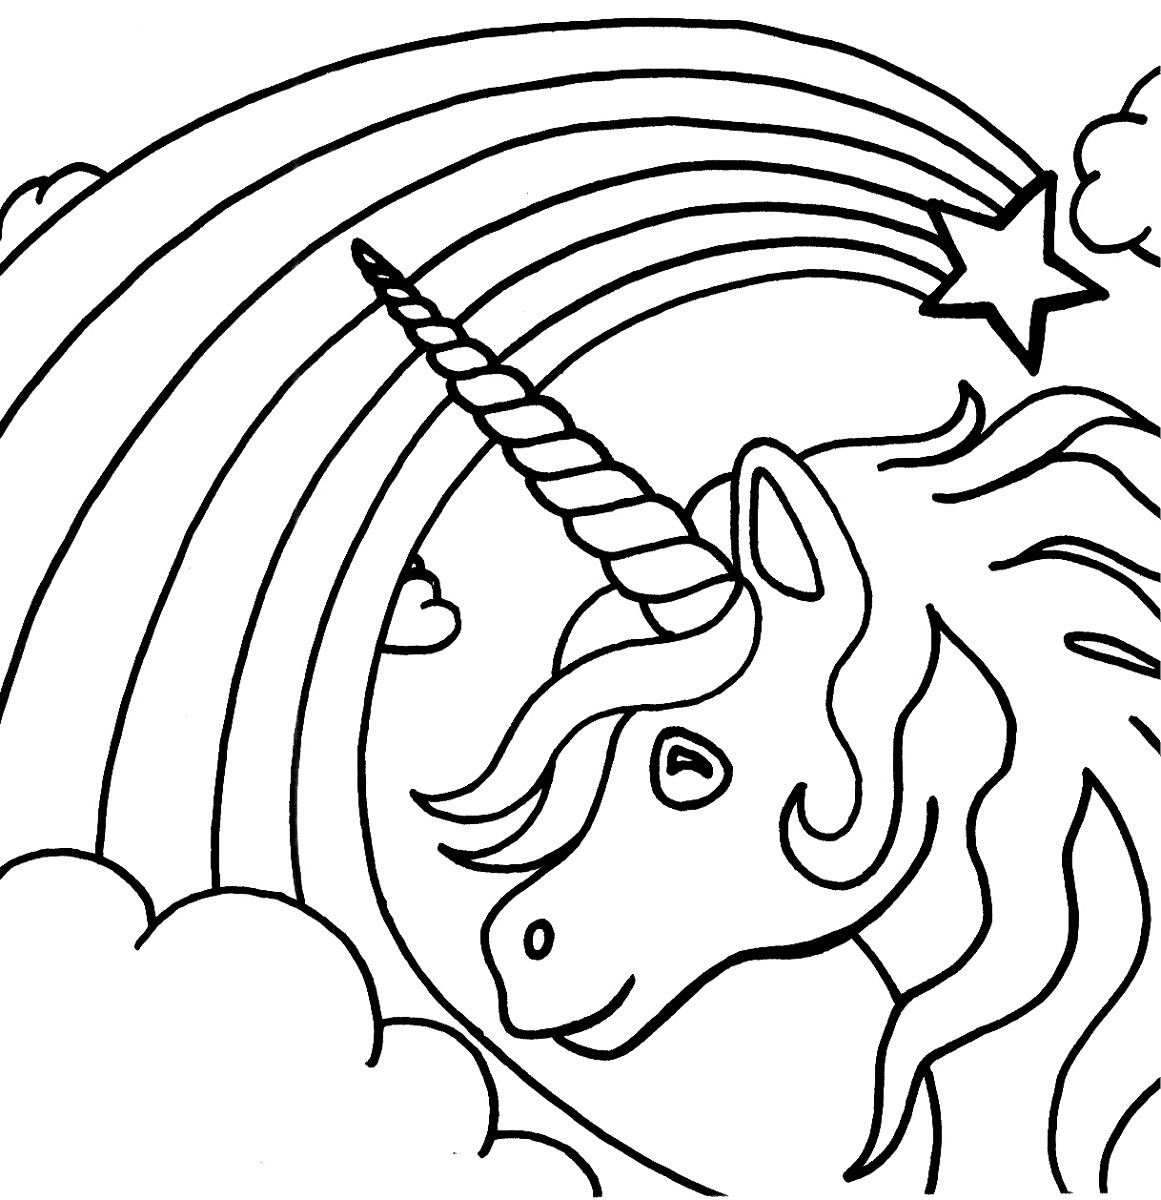 Kids Unicorn Coloring Pages
 Unicorn Coloring Pages For Kids at GetDrawings